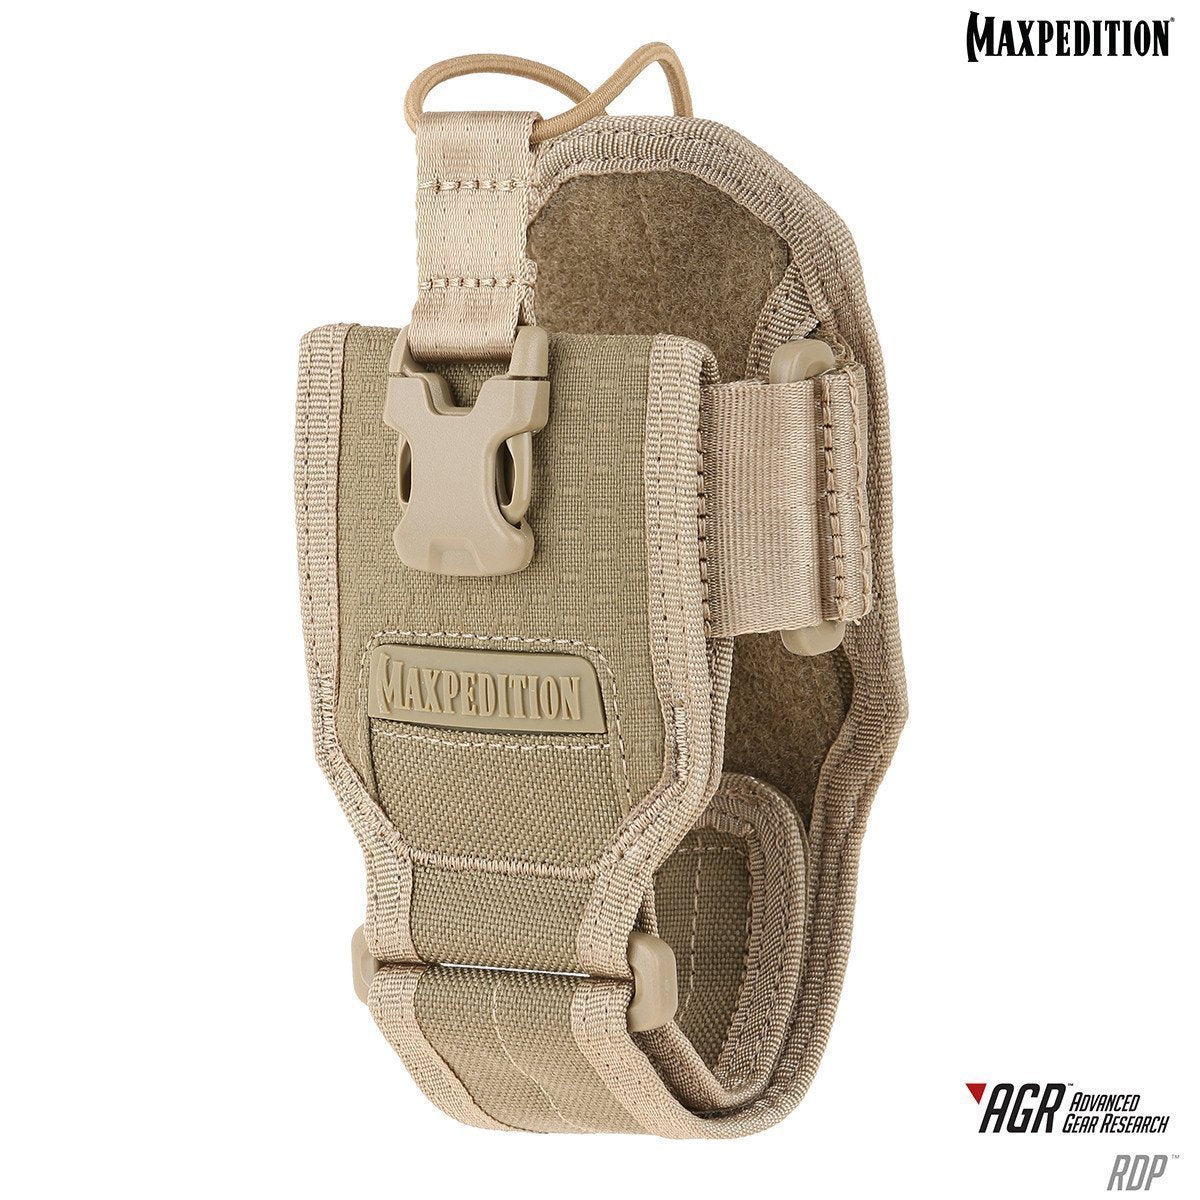 RDP™ Radio Pouch | Maxpedition  Tactical Gear